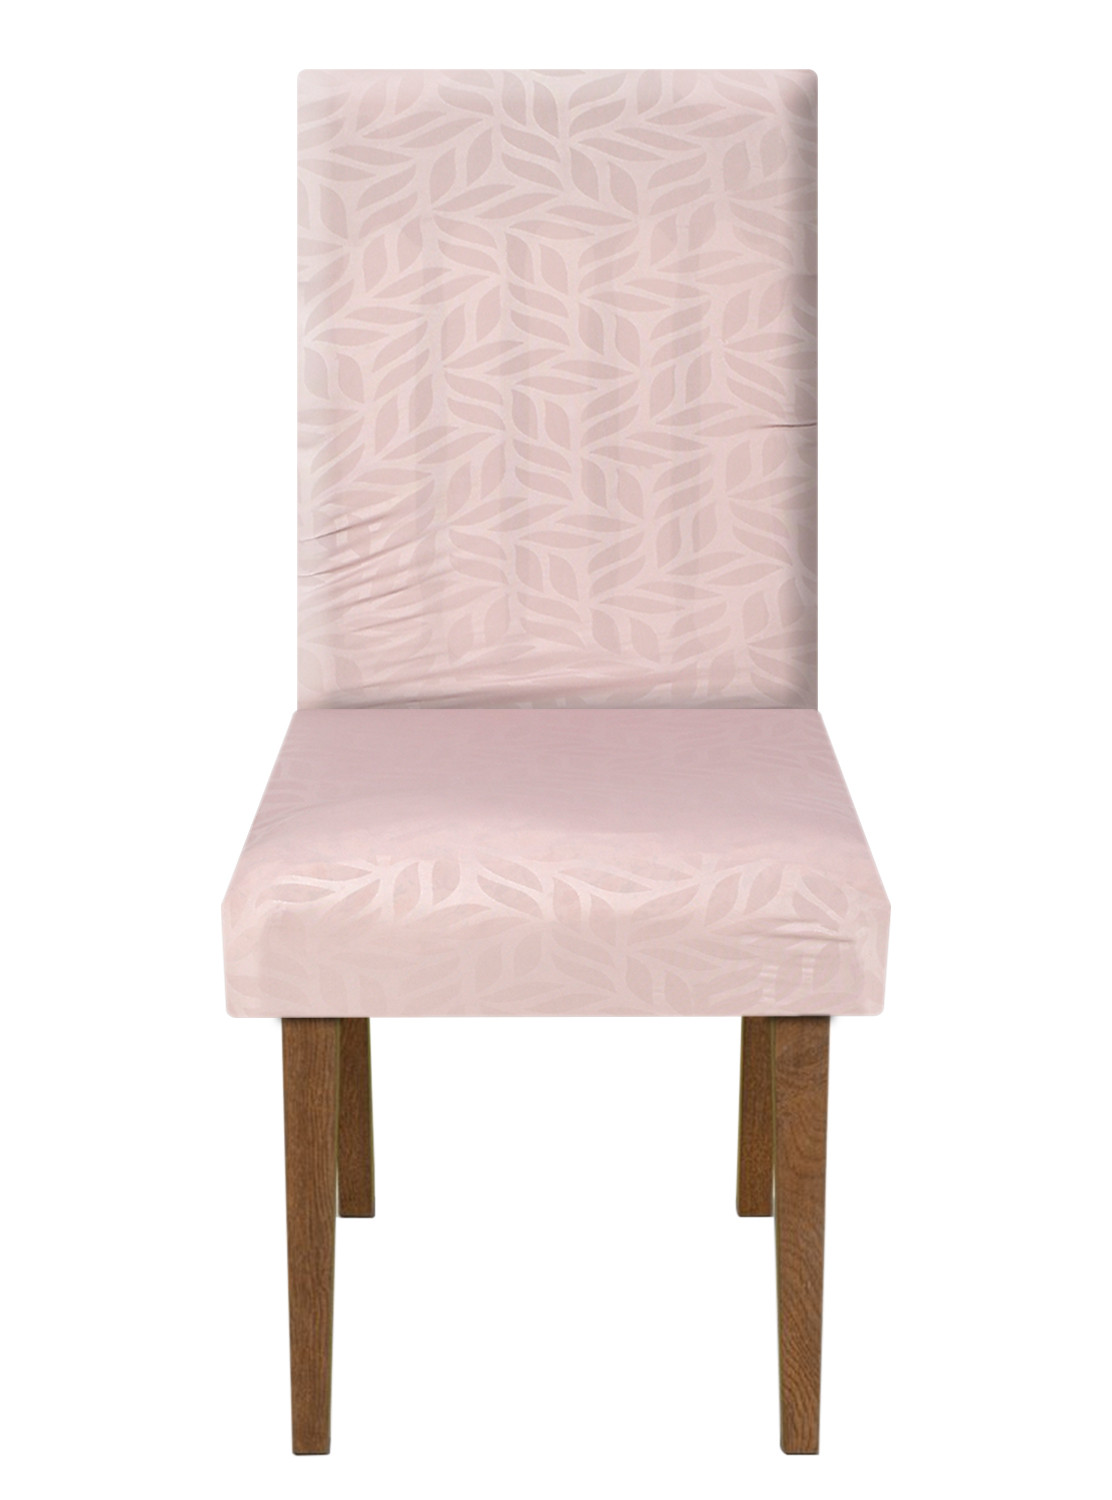 Kuber Industries Leaf Printed Elastic Stretchable Polyster Chair Cover For Home, Office, Hotels, Wedding Banquet (Pink)